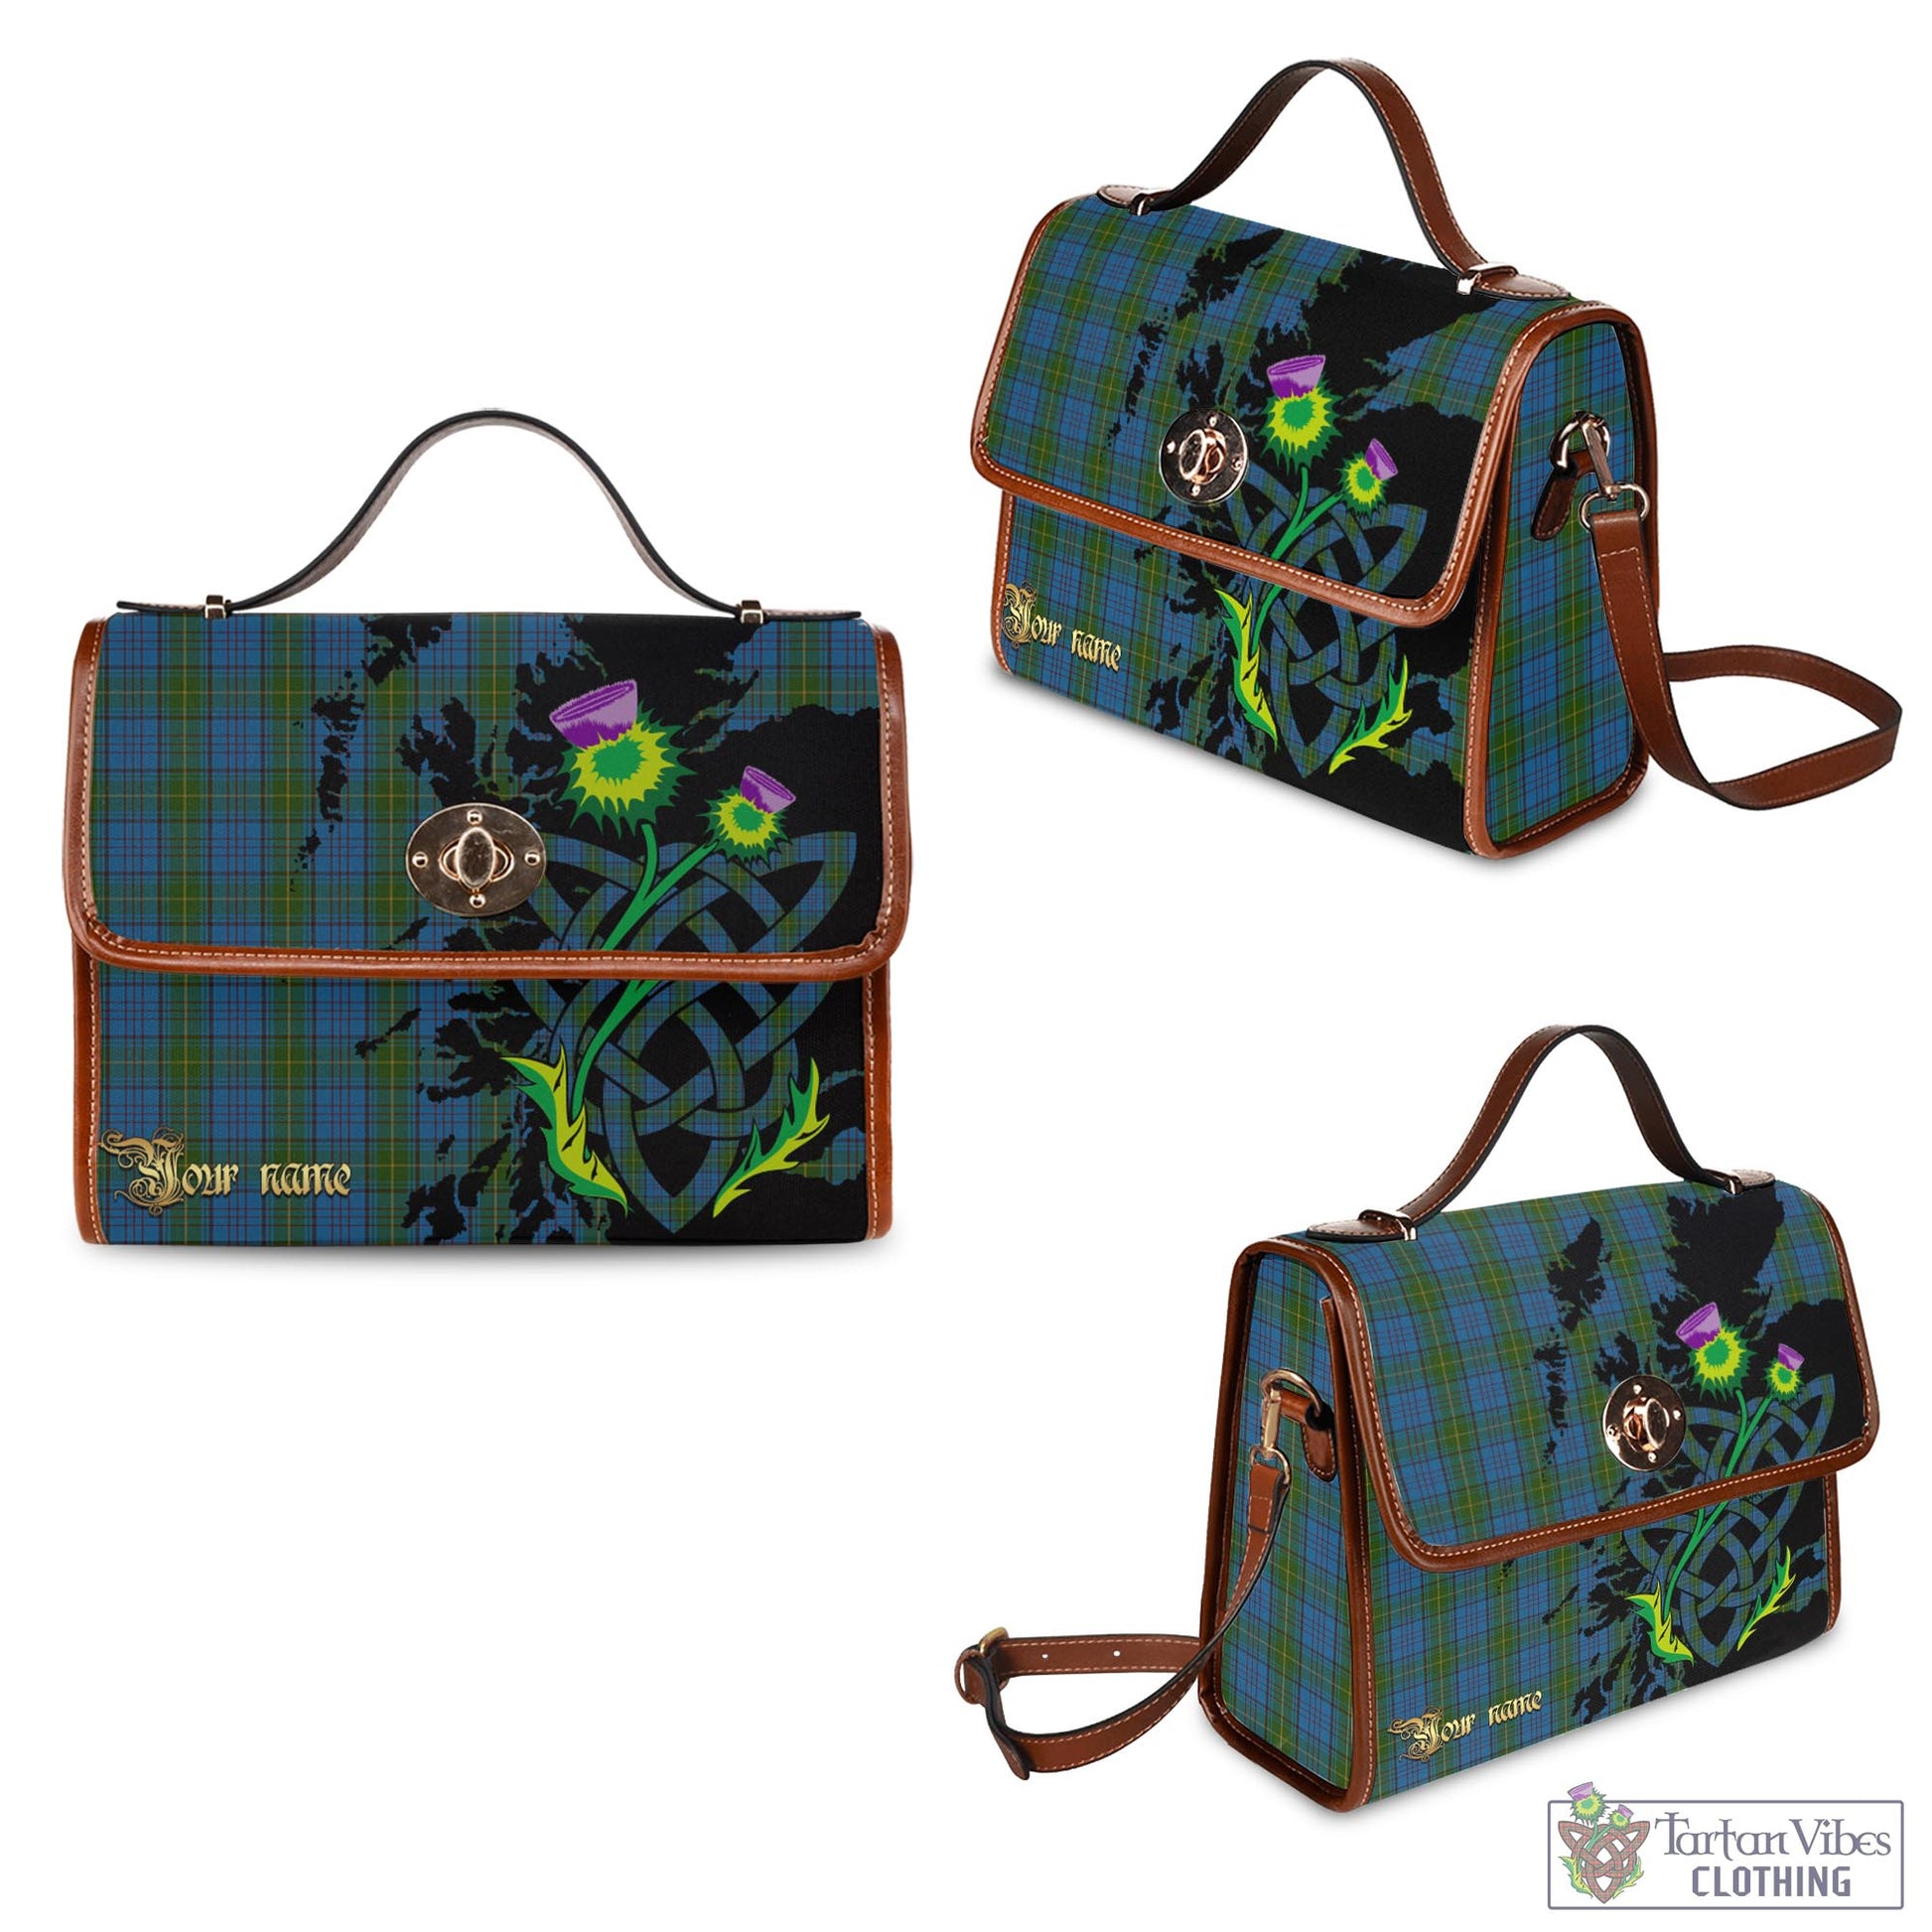 Tartan Vibes Clothing Donegal County Ireland Tartan Waterproof Canvas Bag with Scotland Map and Thistle Celtic Accents